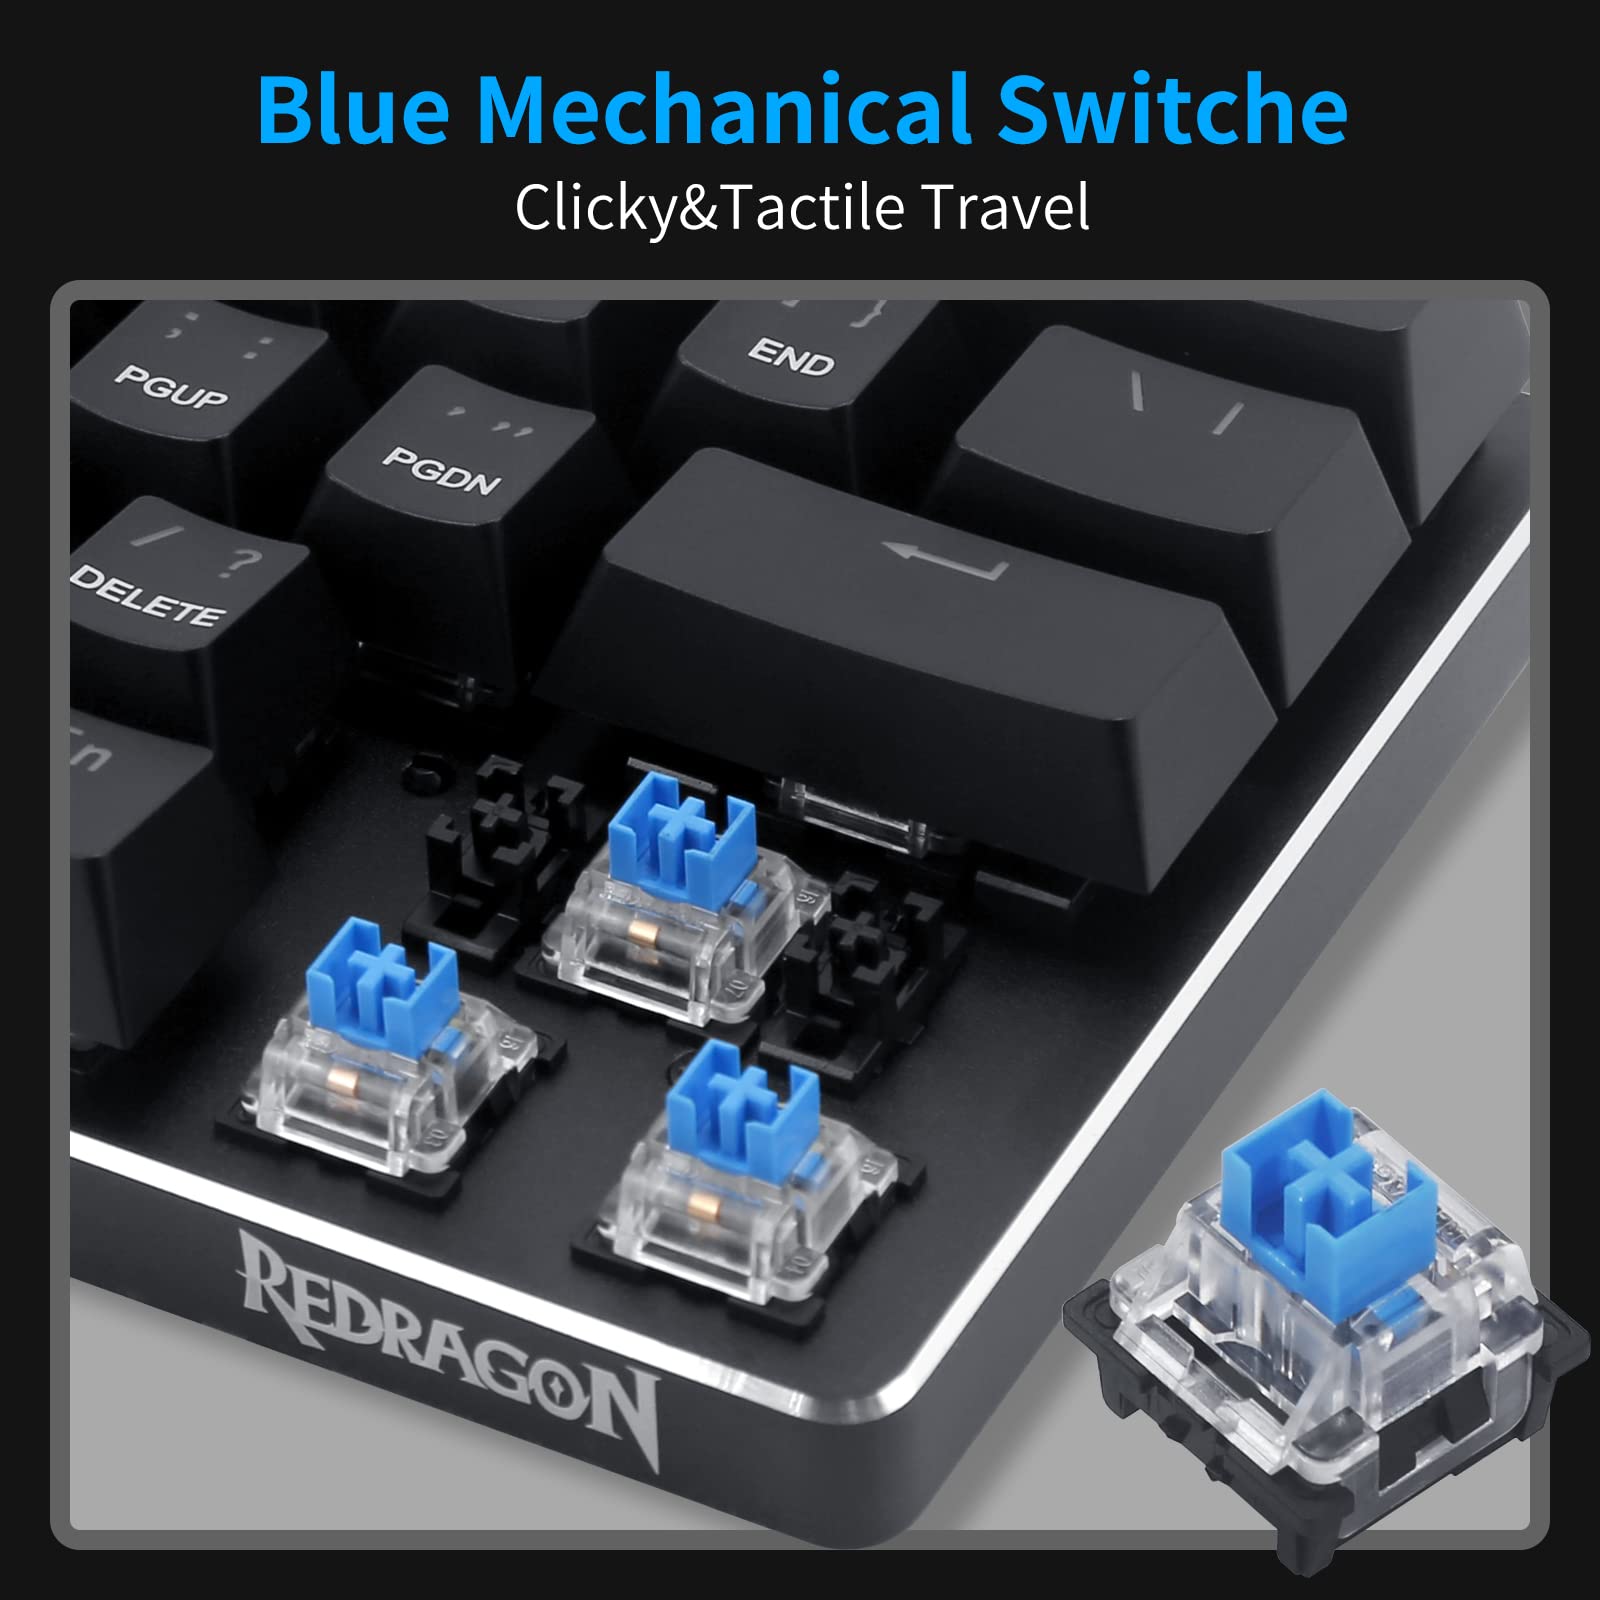 Redragon K613 60% Mini Mechanical Gaming Keyboard 61 Key Tenkeyless Rainbow LED Backlit Wired Computer Keyboard with Blue Switches for Windows PC